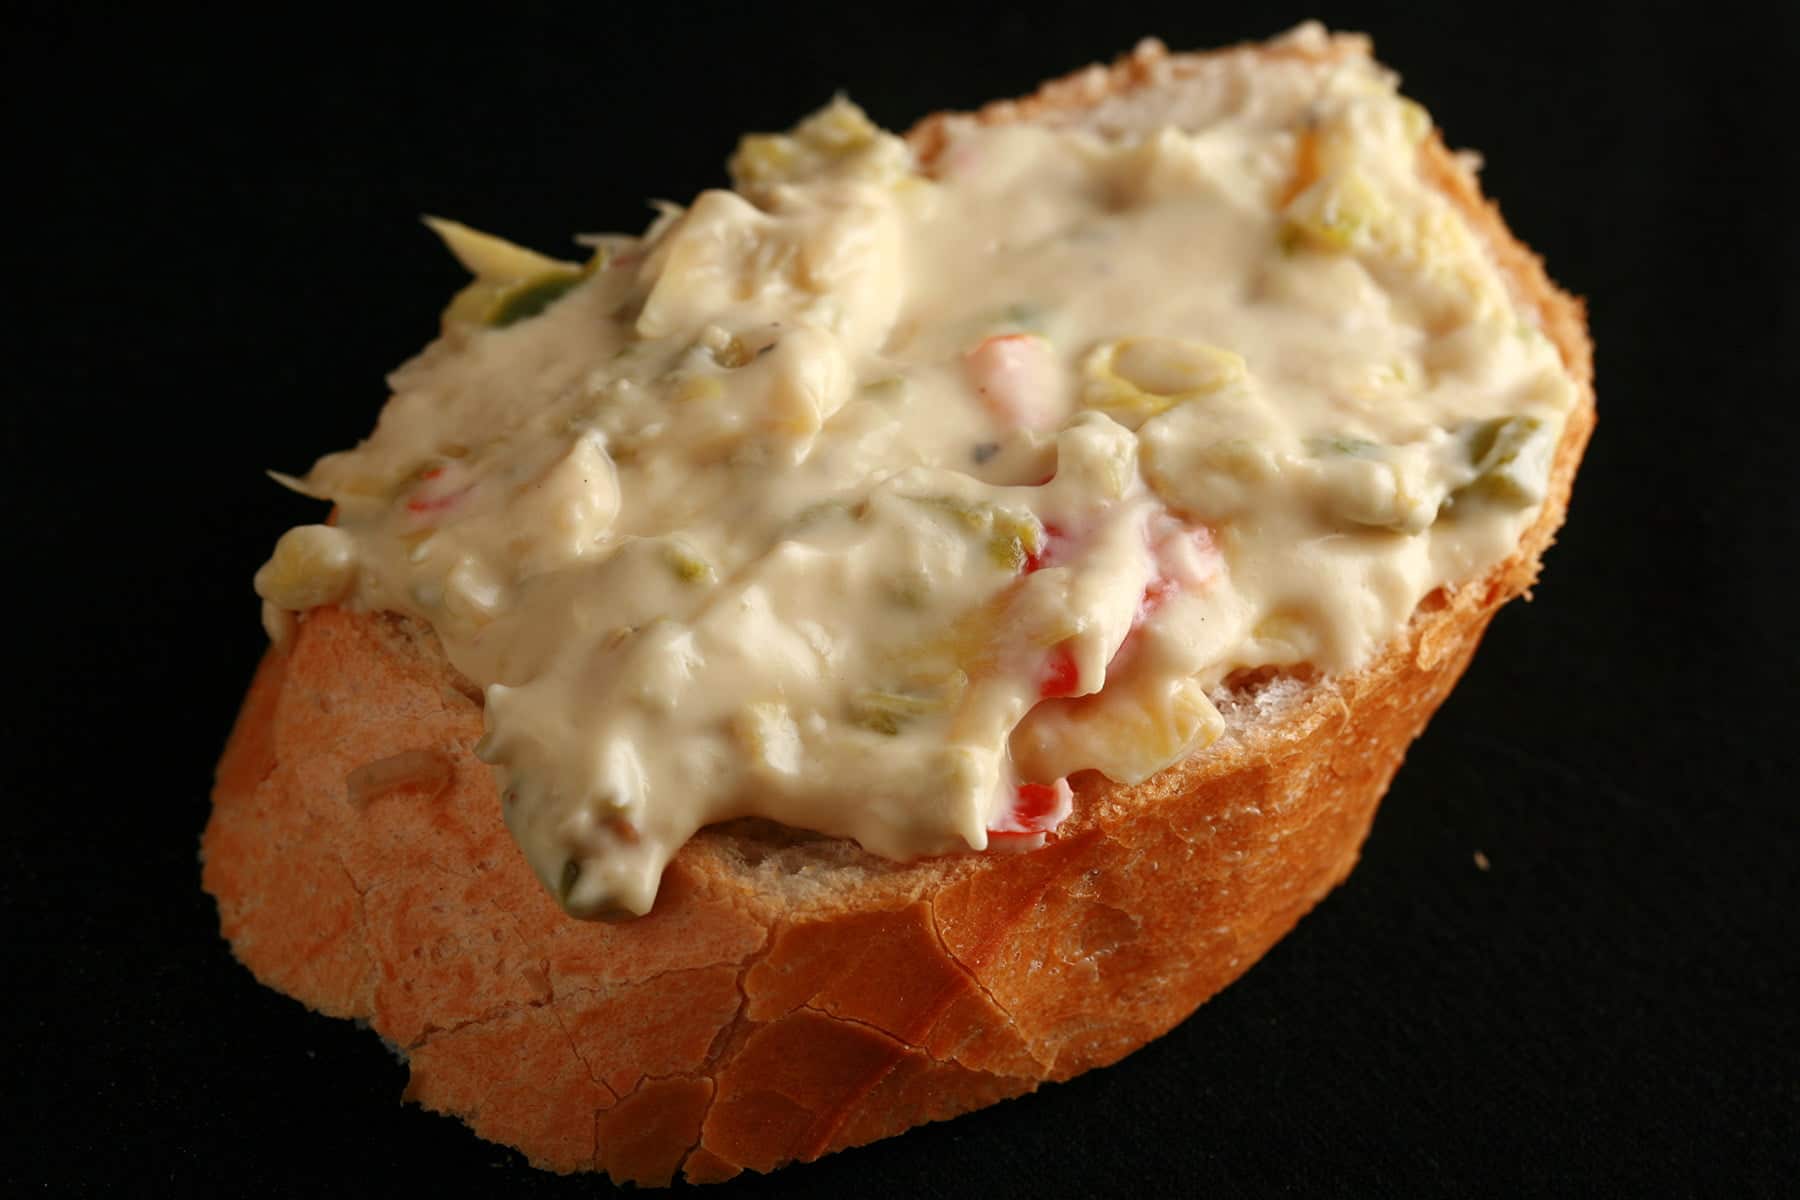 A slice of baguette spread with Backfire dip - a chunky jalapeno artichoke cheese dip.